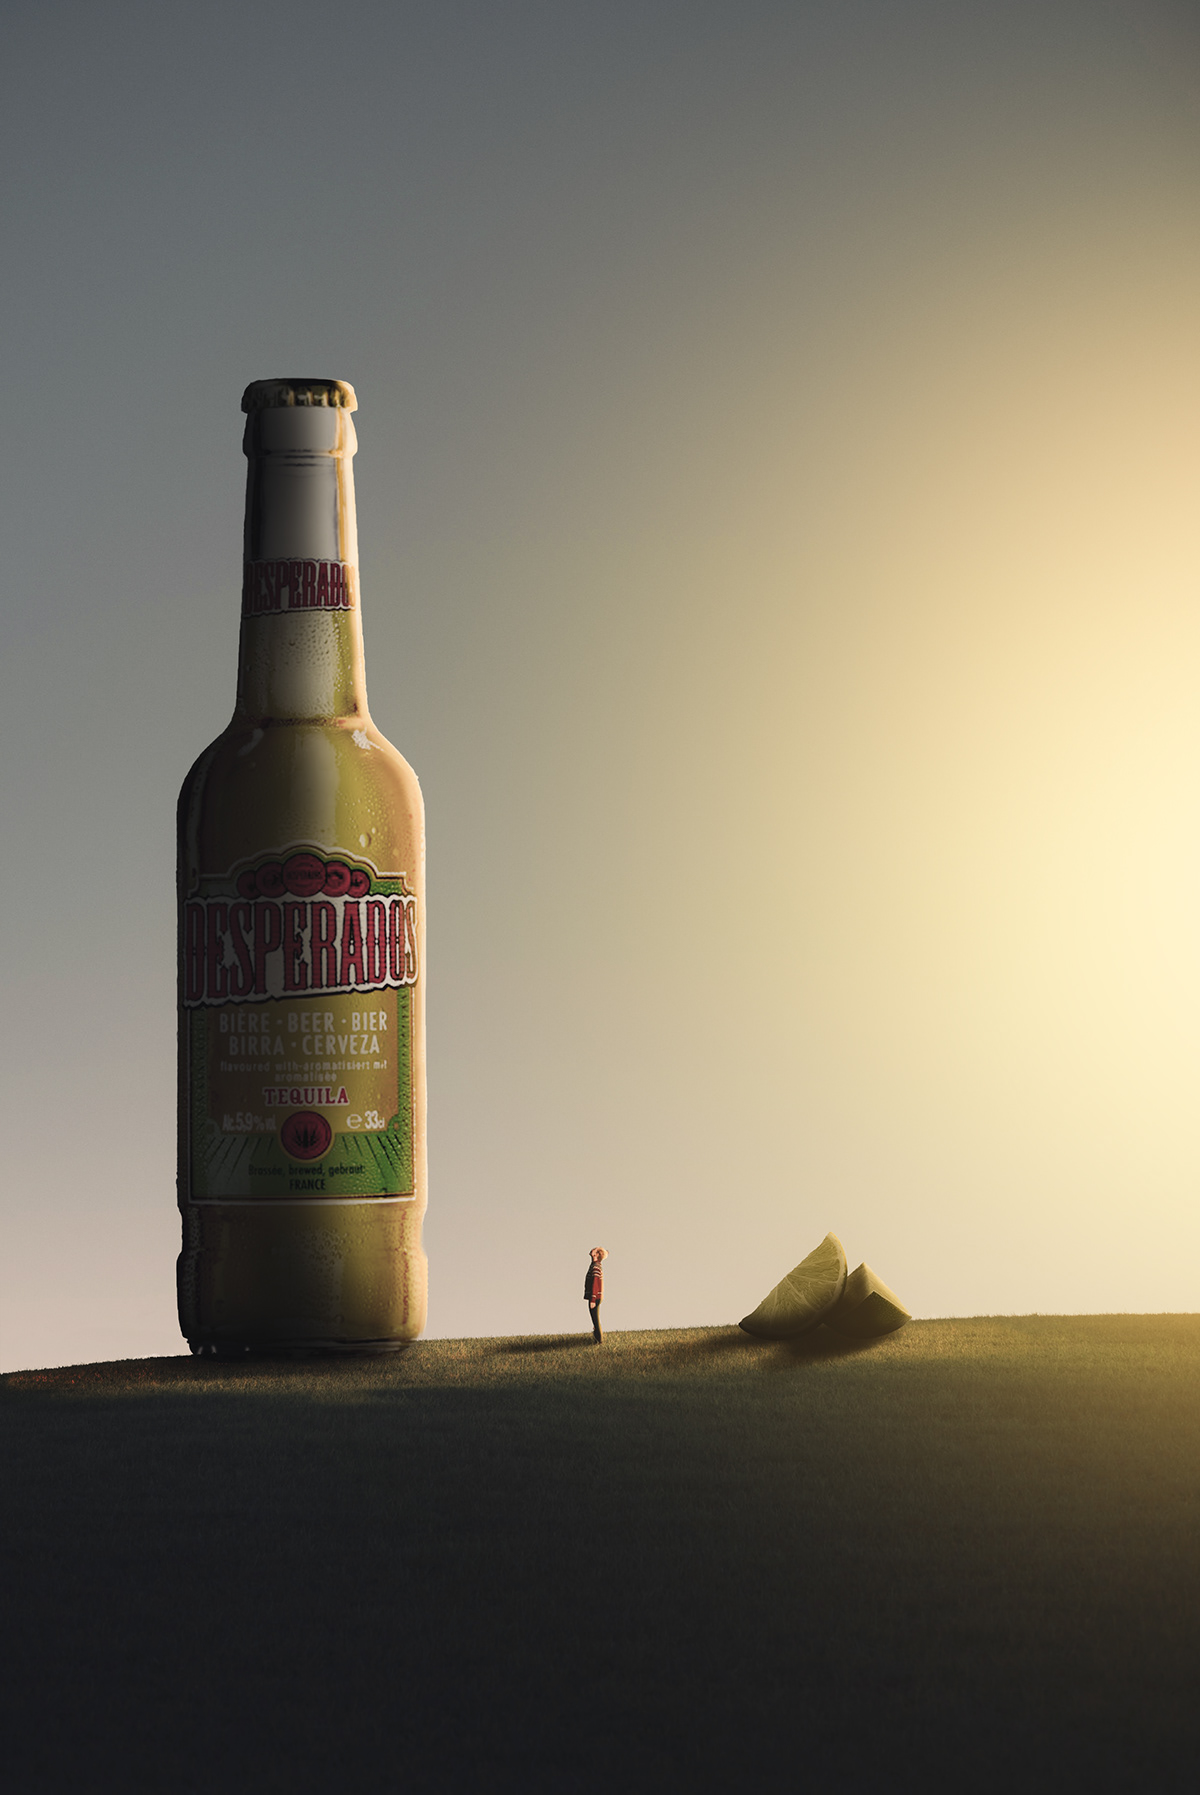 Tiny human standing on the field, looking up at huge bottle of Desperados beer and big lime wedges 